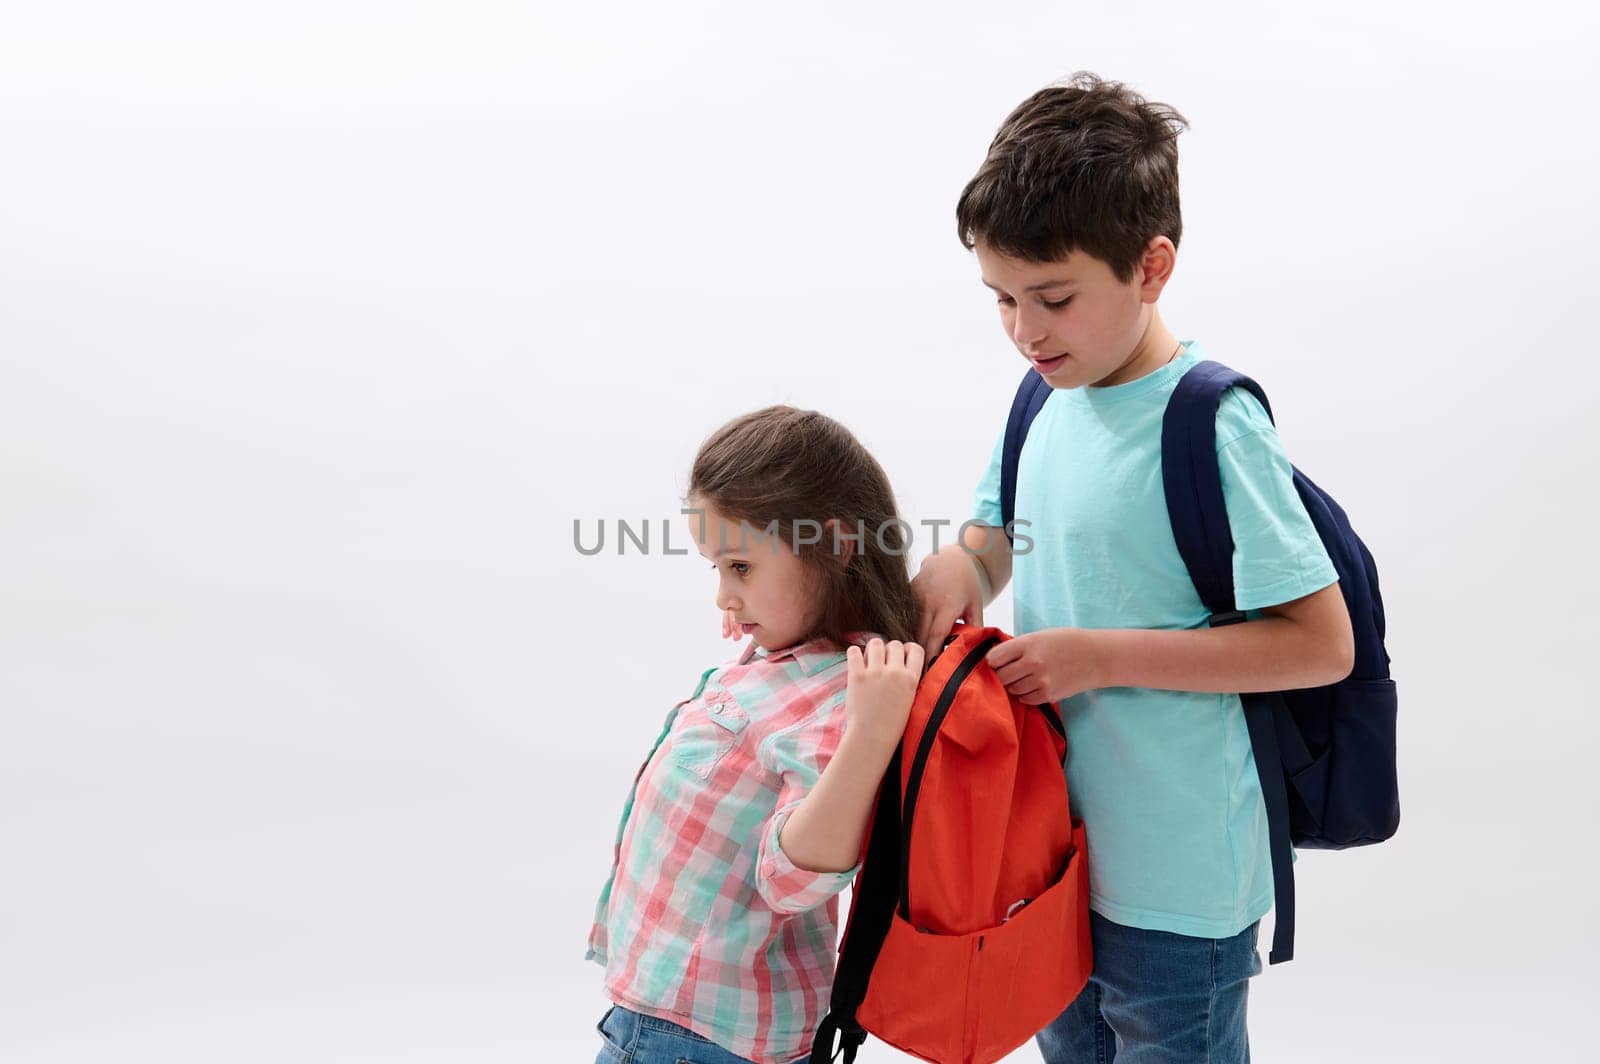 Handsome Caucasian teen boy, a loving caring older brother helps his younger sister to put on a backpack on back, going to school, isolated on white background. Education. New semester. Copy ad space